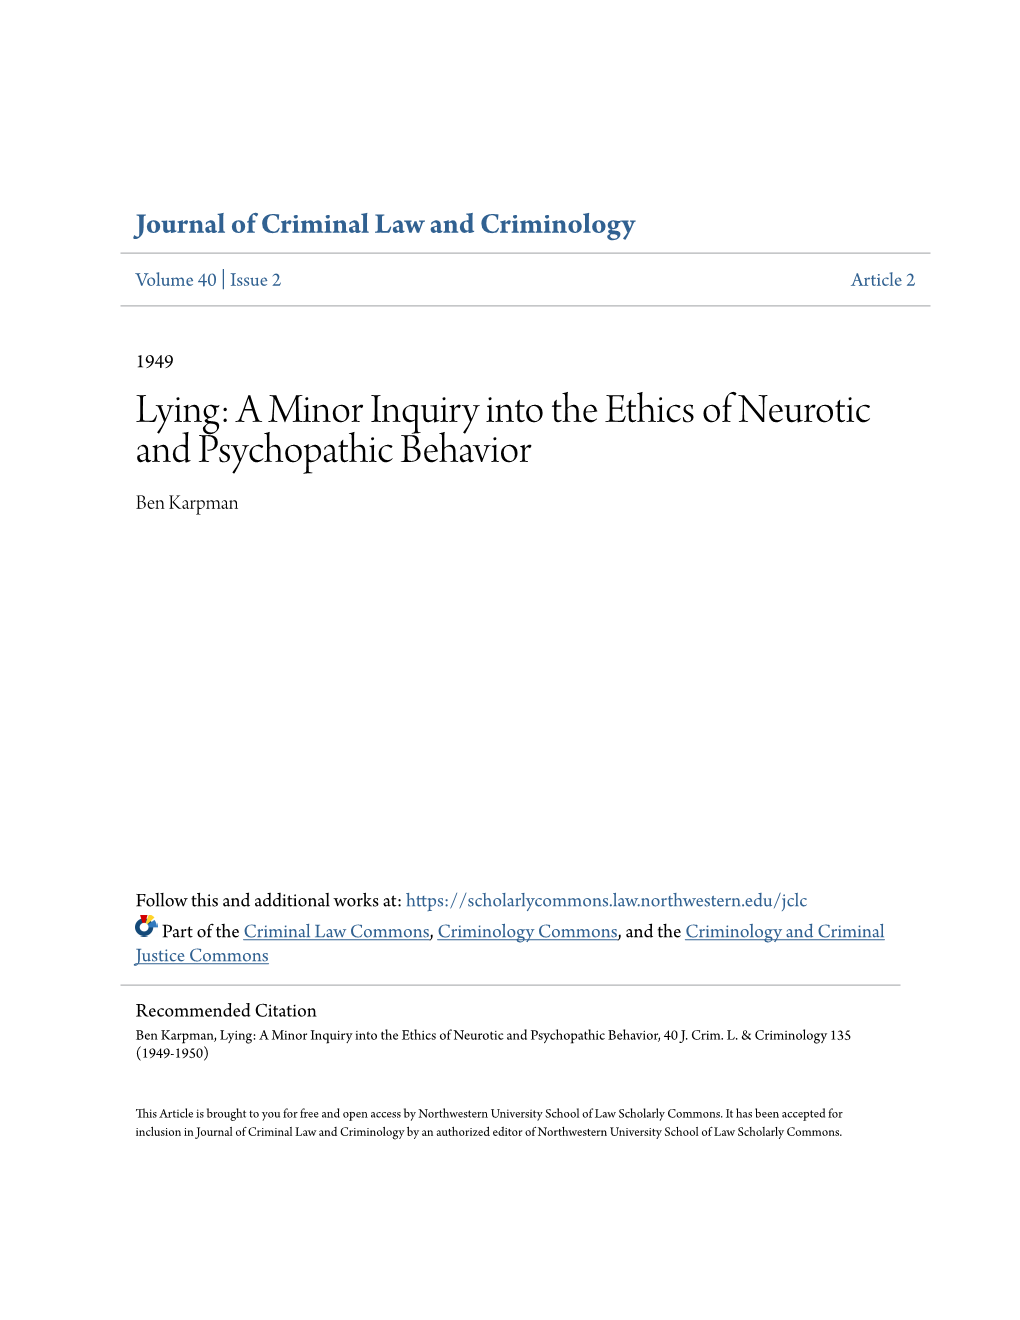 Lying: a Minor Inquiry Into the Ethics of Neurotic and Psychopathic Behavior Ben Karpman